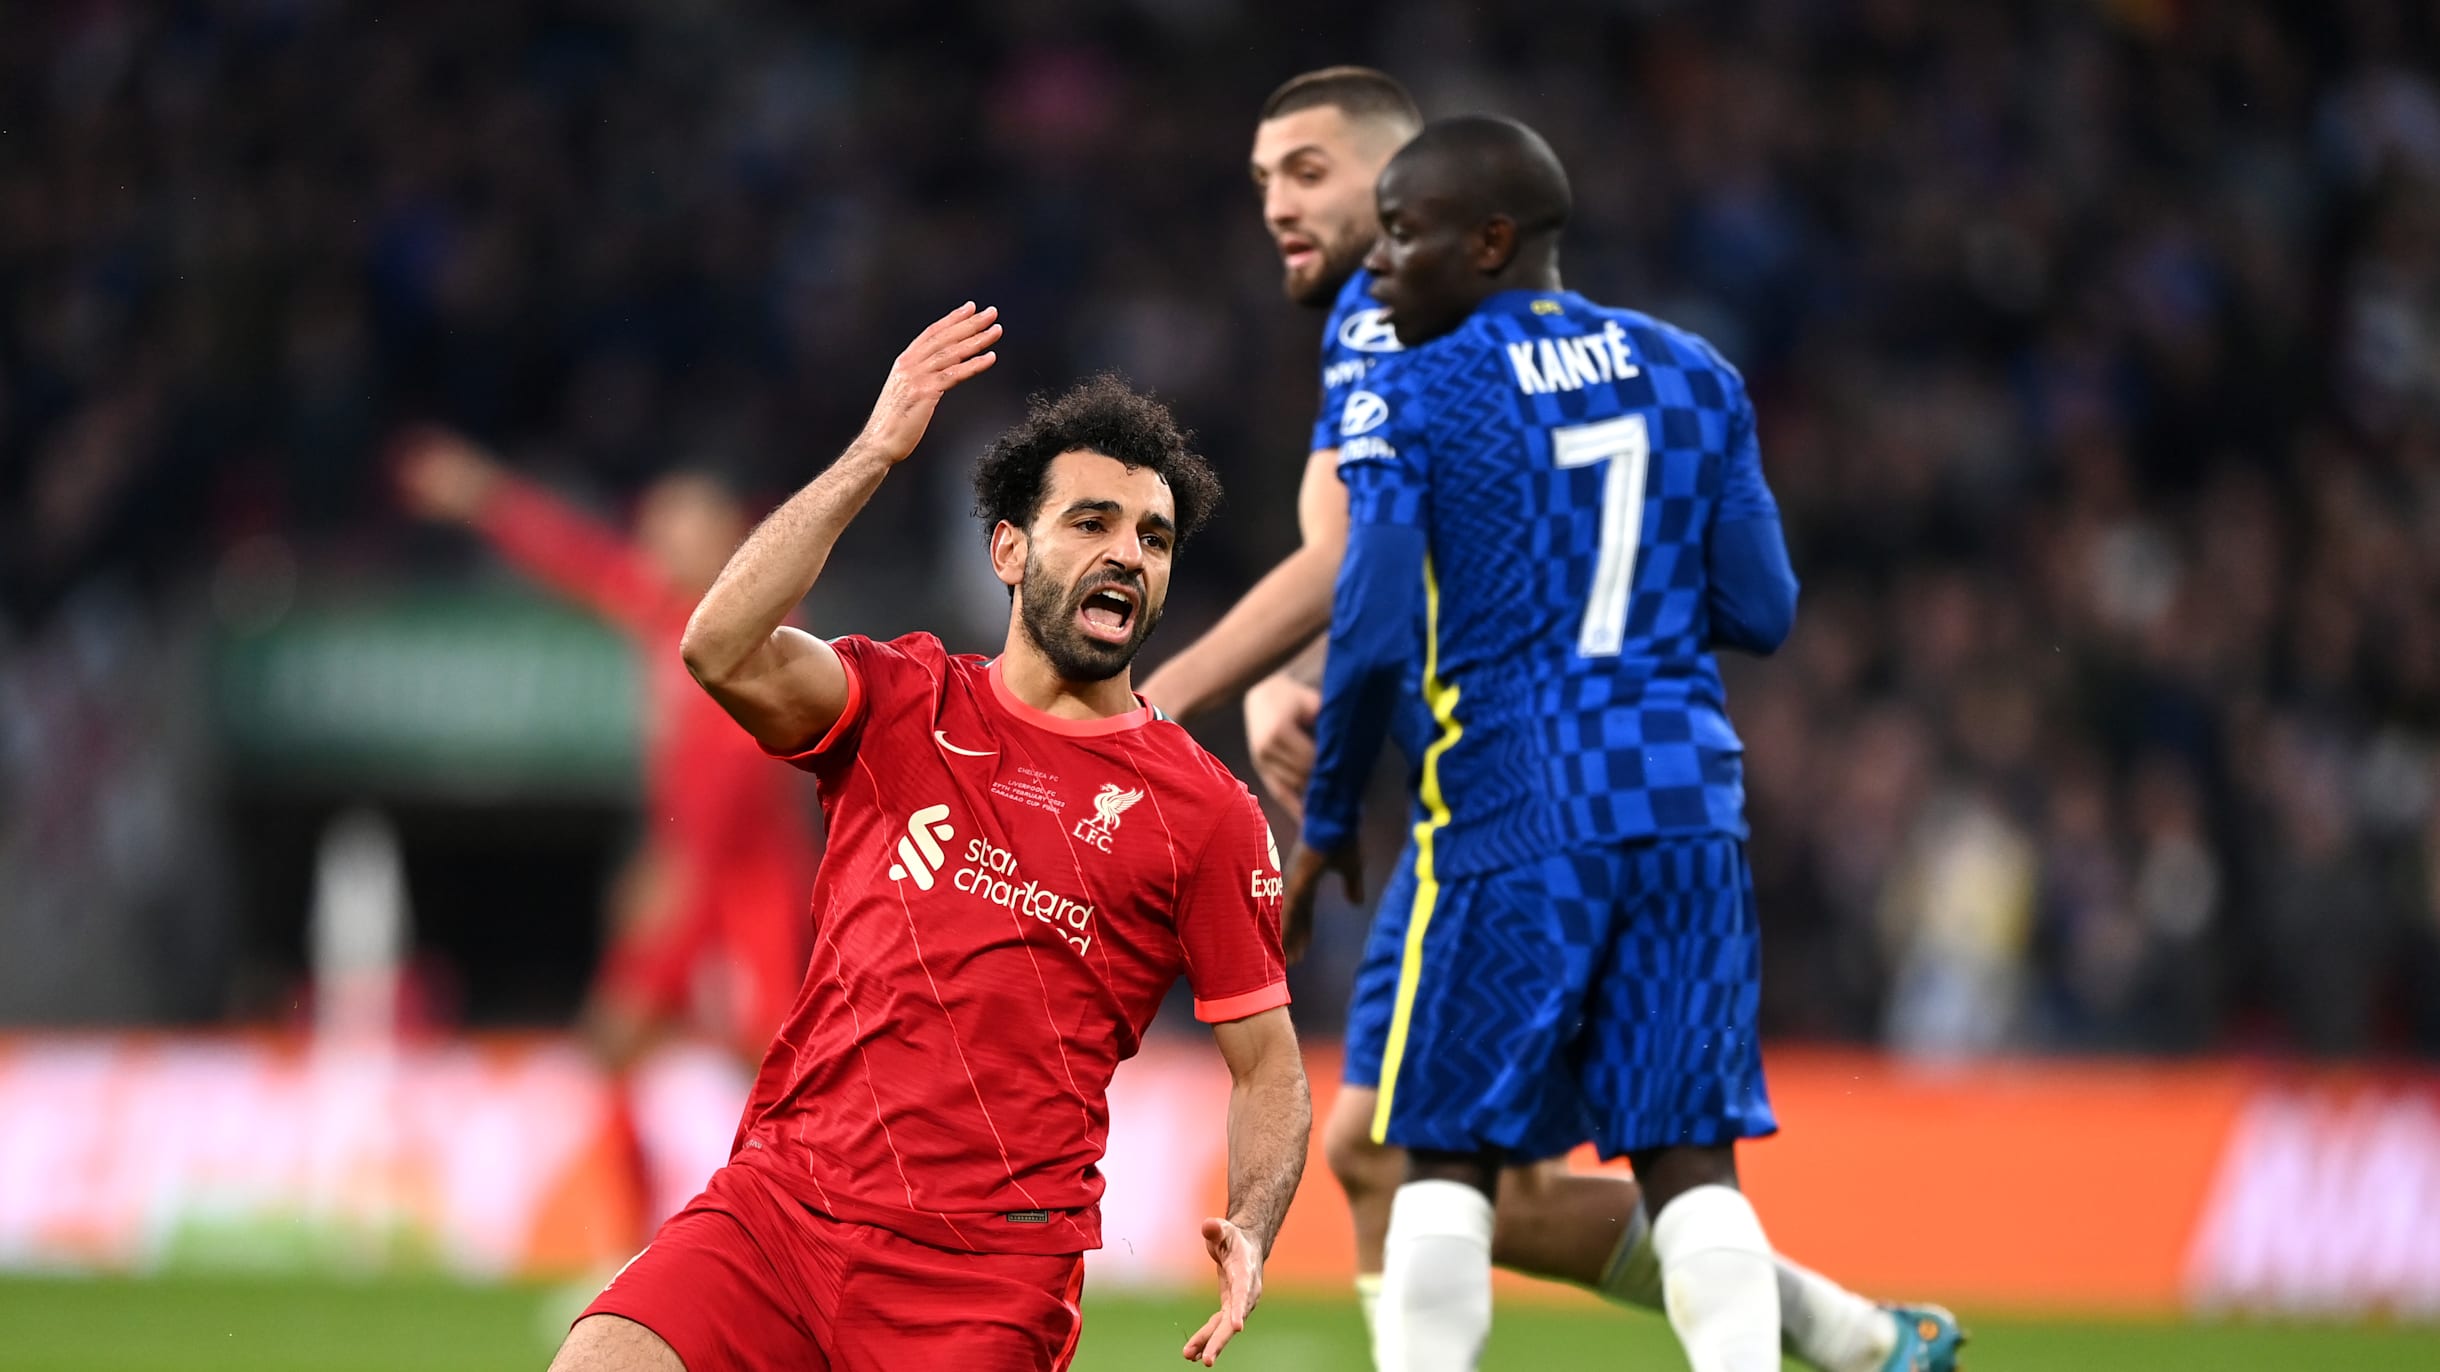 FA Cup 2021-22 final, Chelsea vs Liverpool Watch telecast and live streaming in India